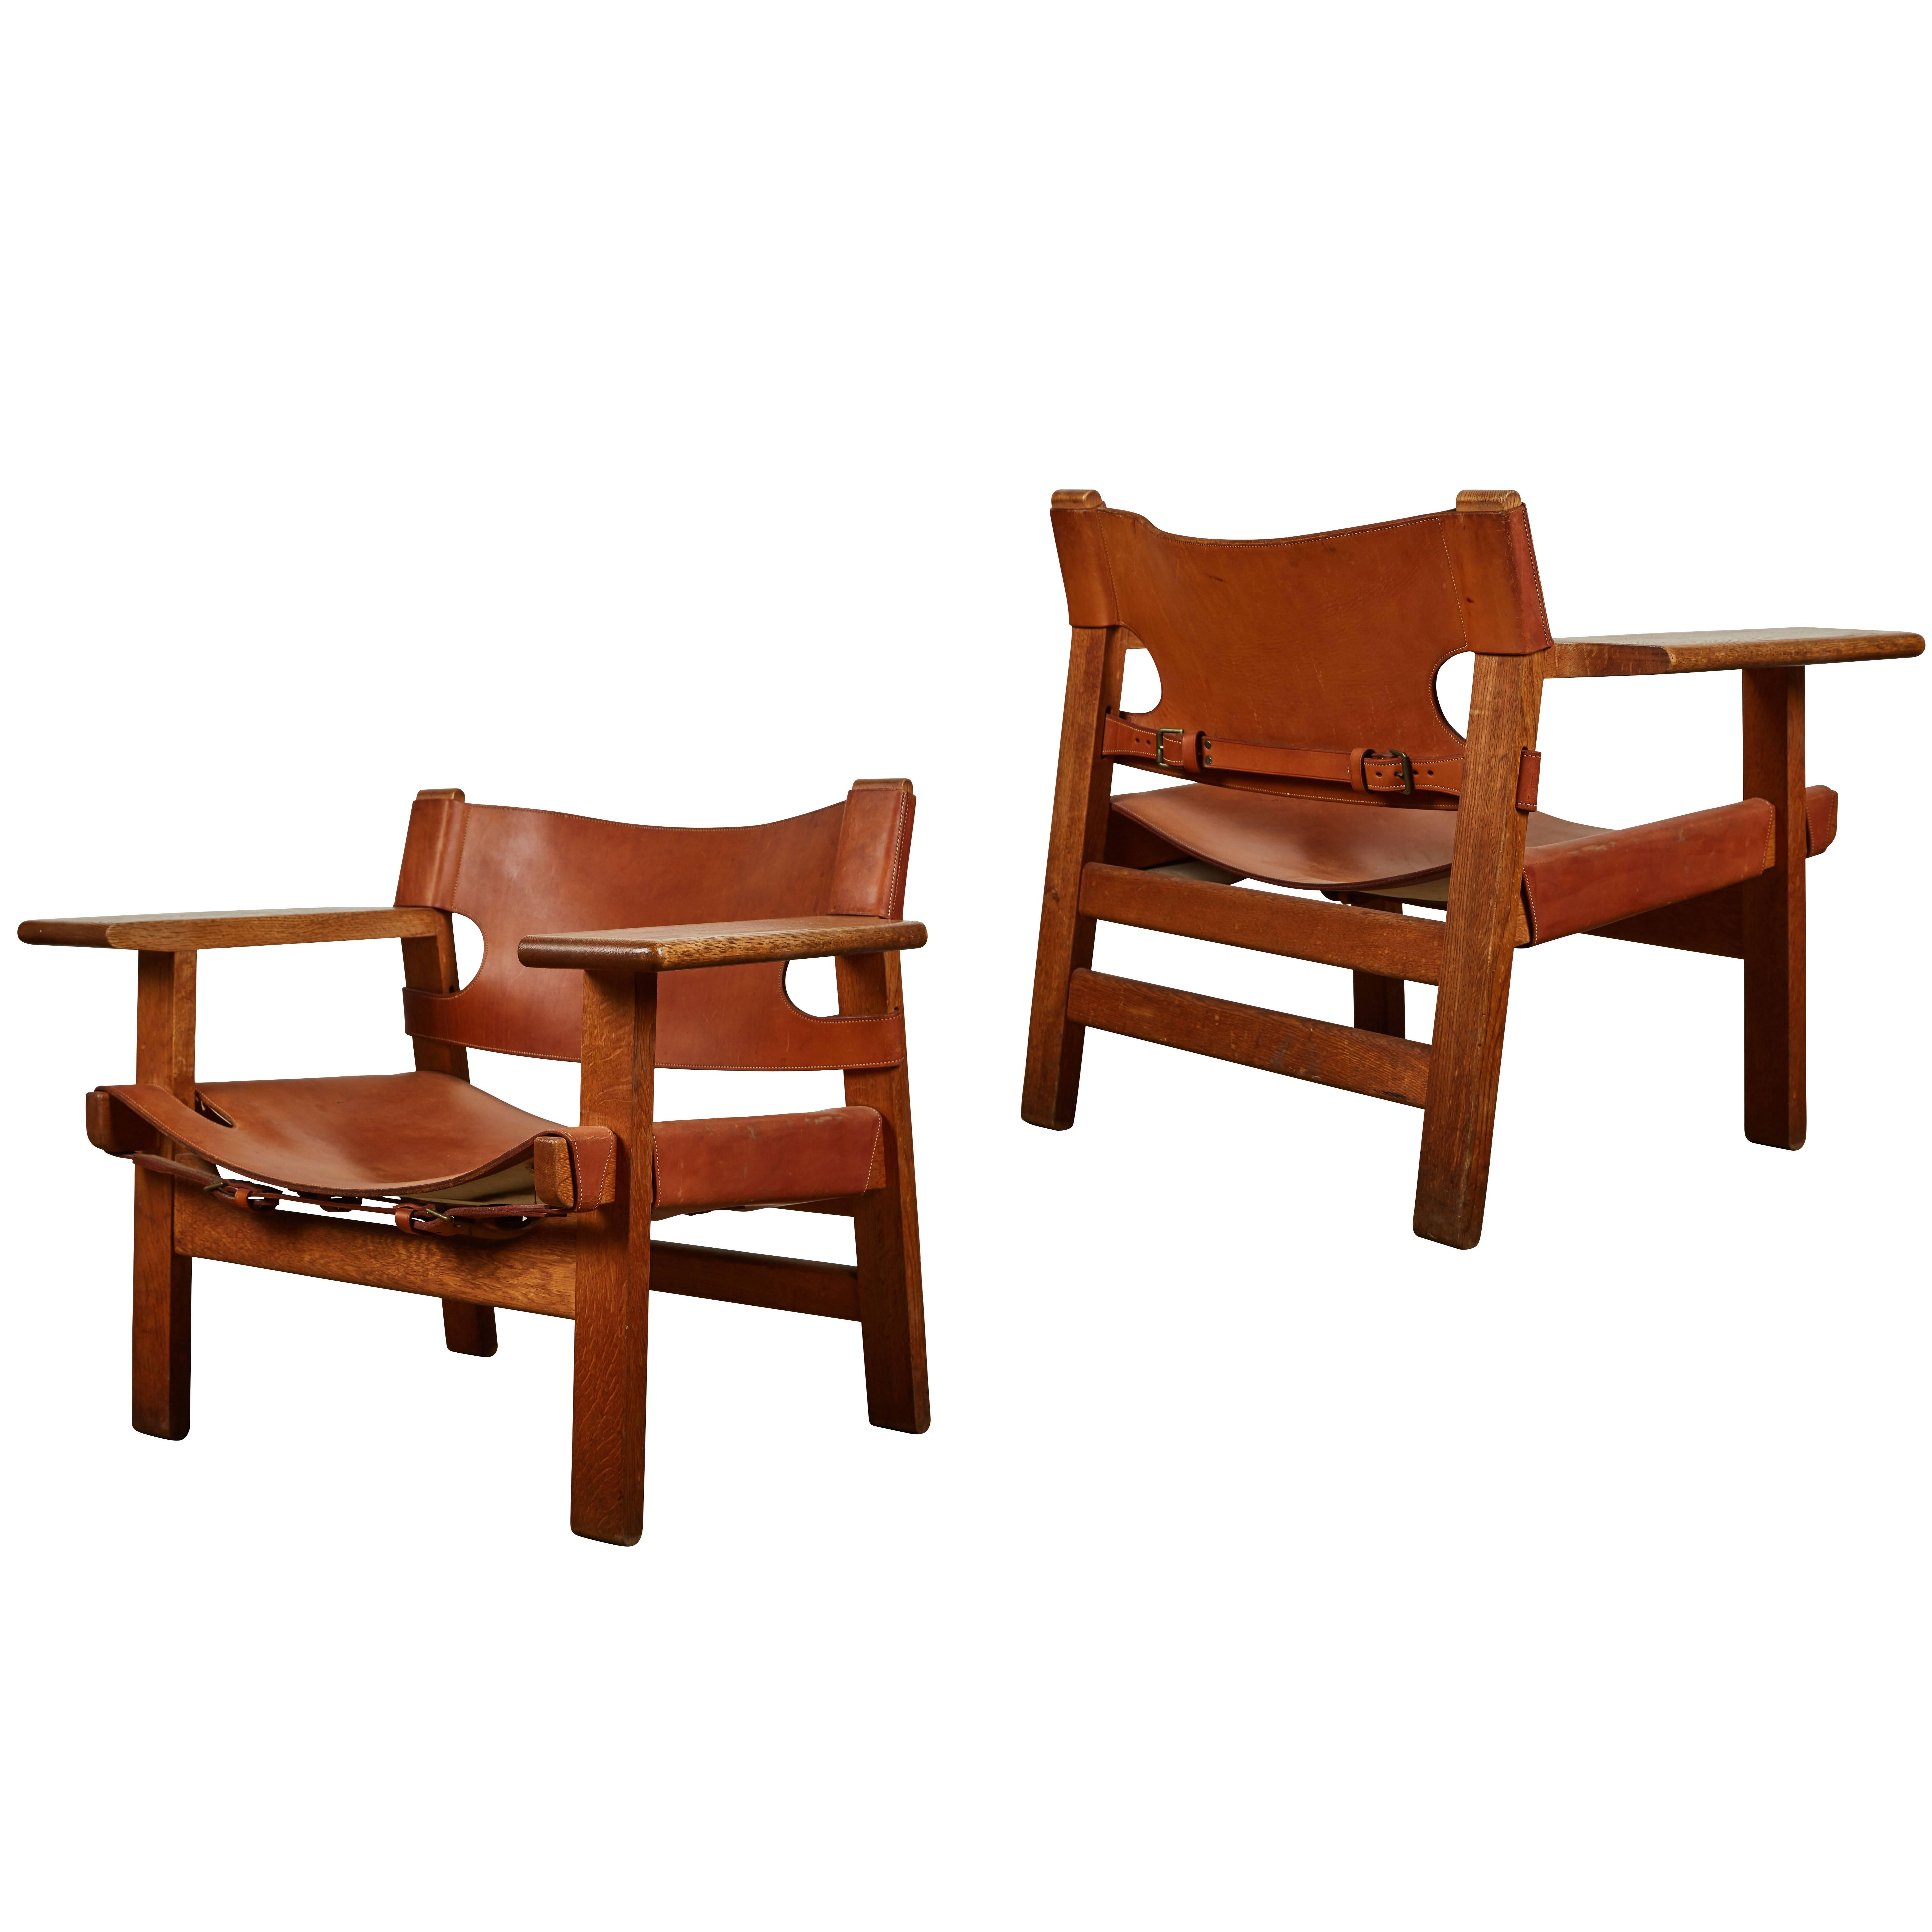 Pair of Early Spanish Chairs by Børge Mogensen